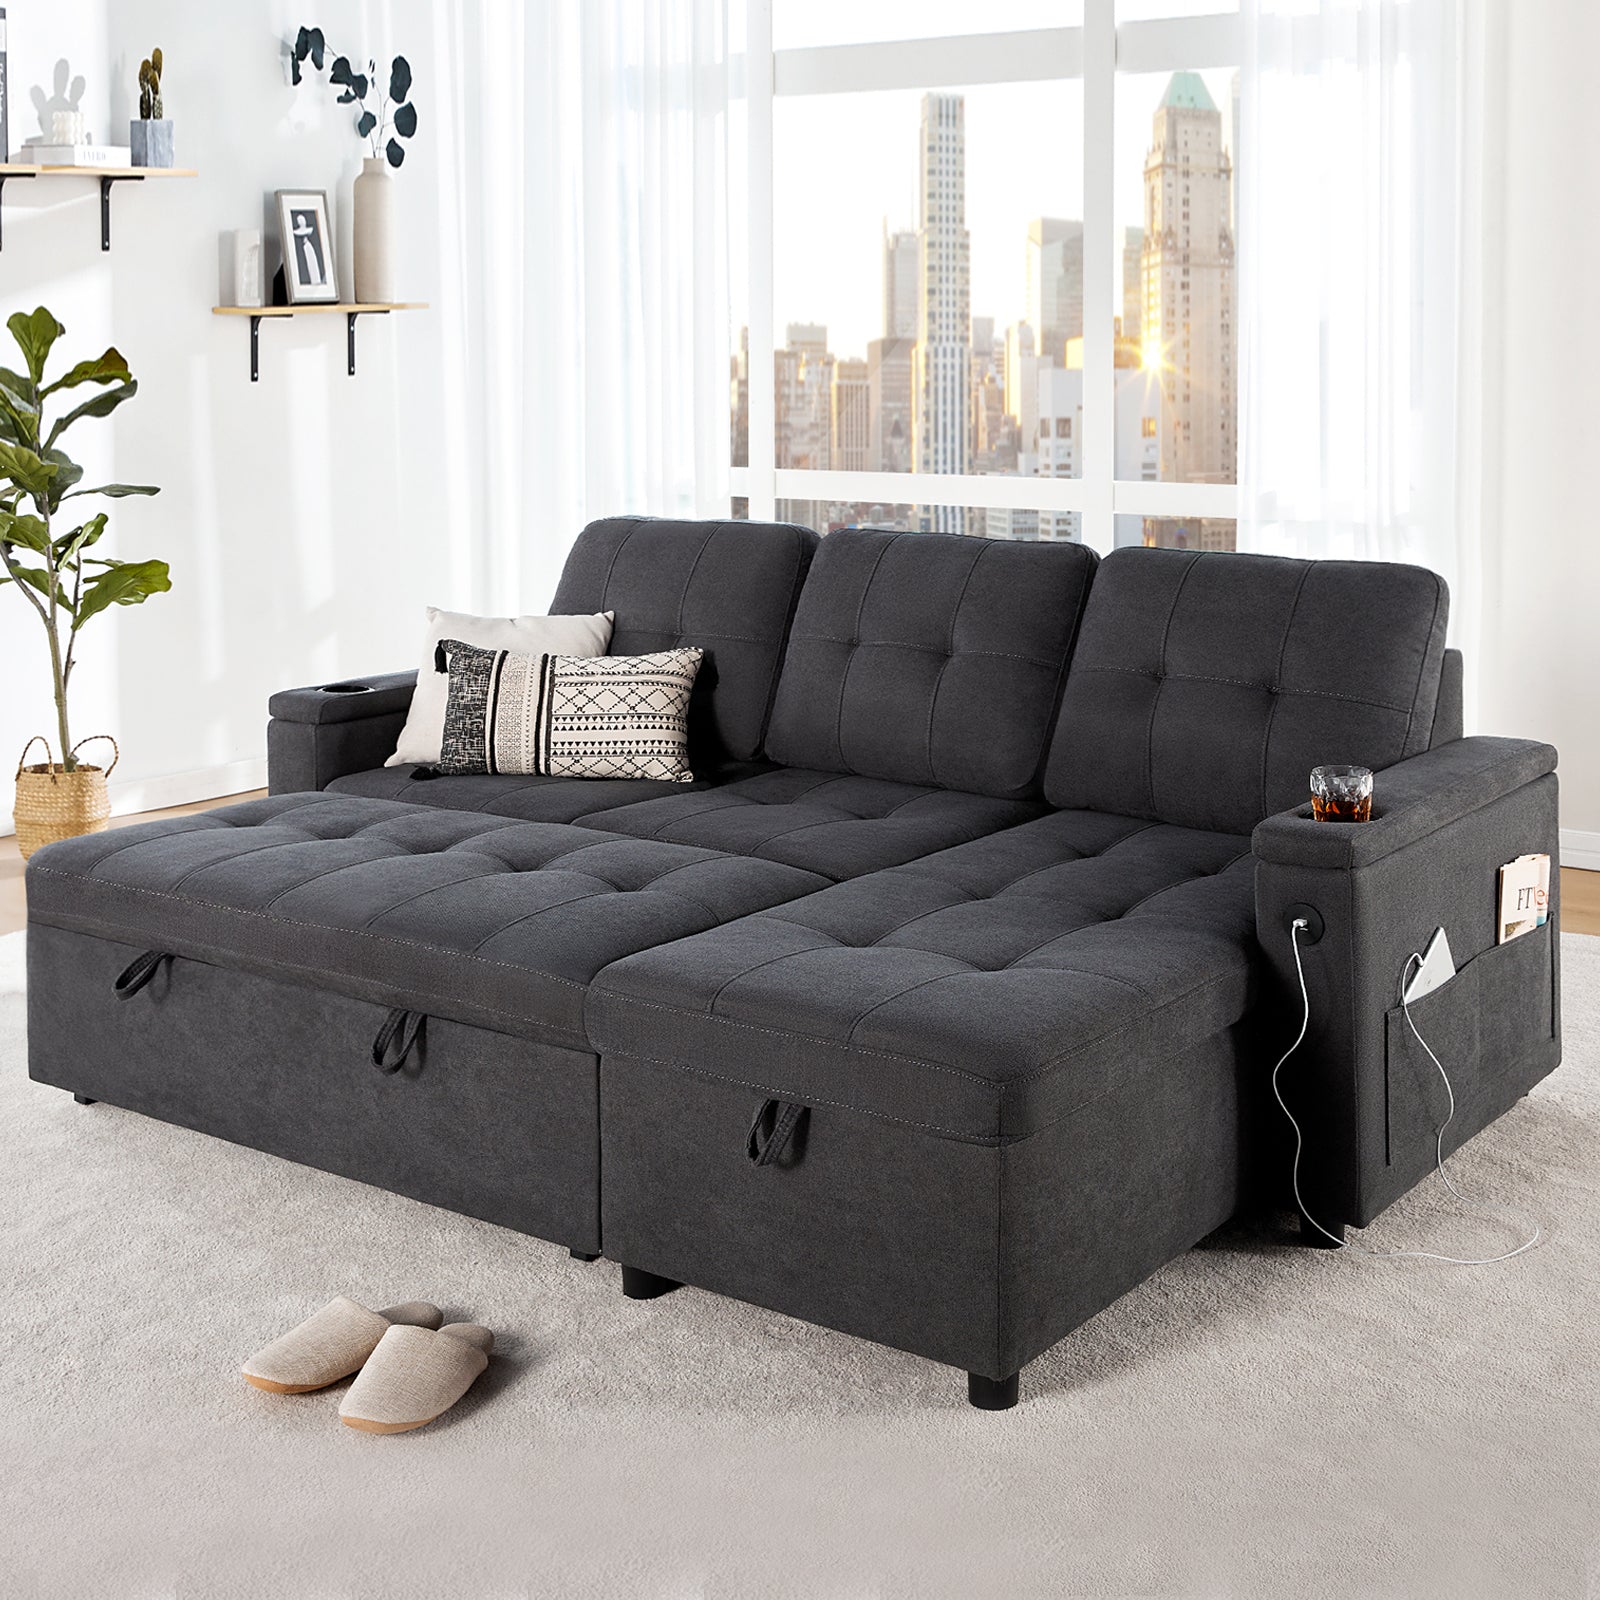 Amerlife Theo Sofa Bed Modern Tufted